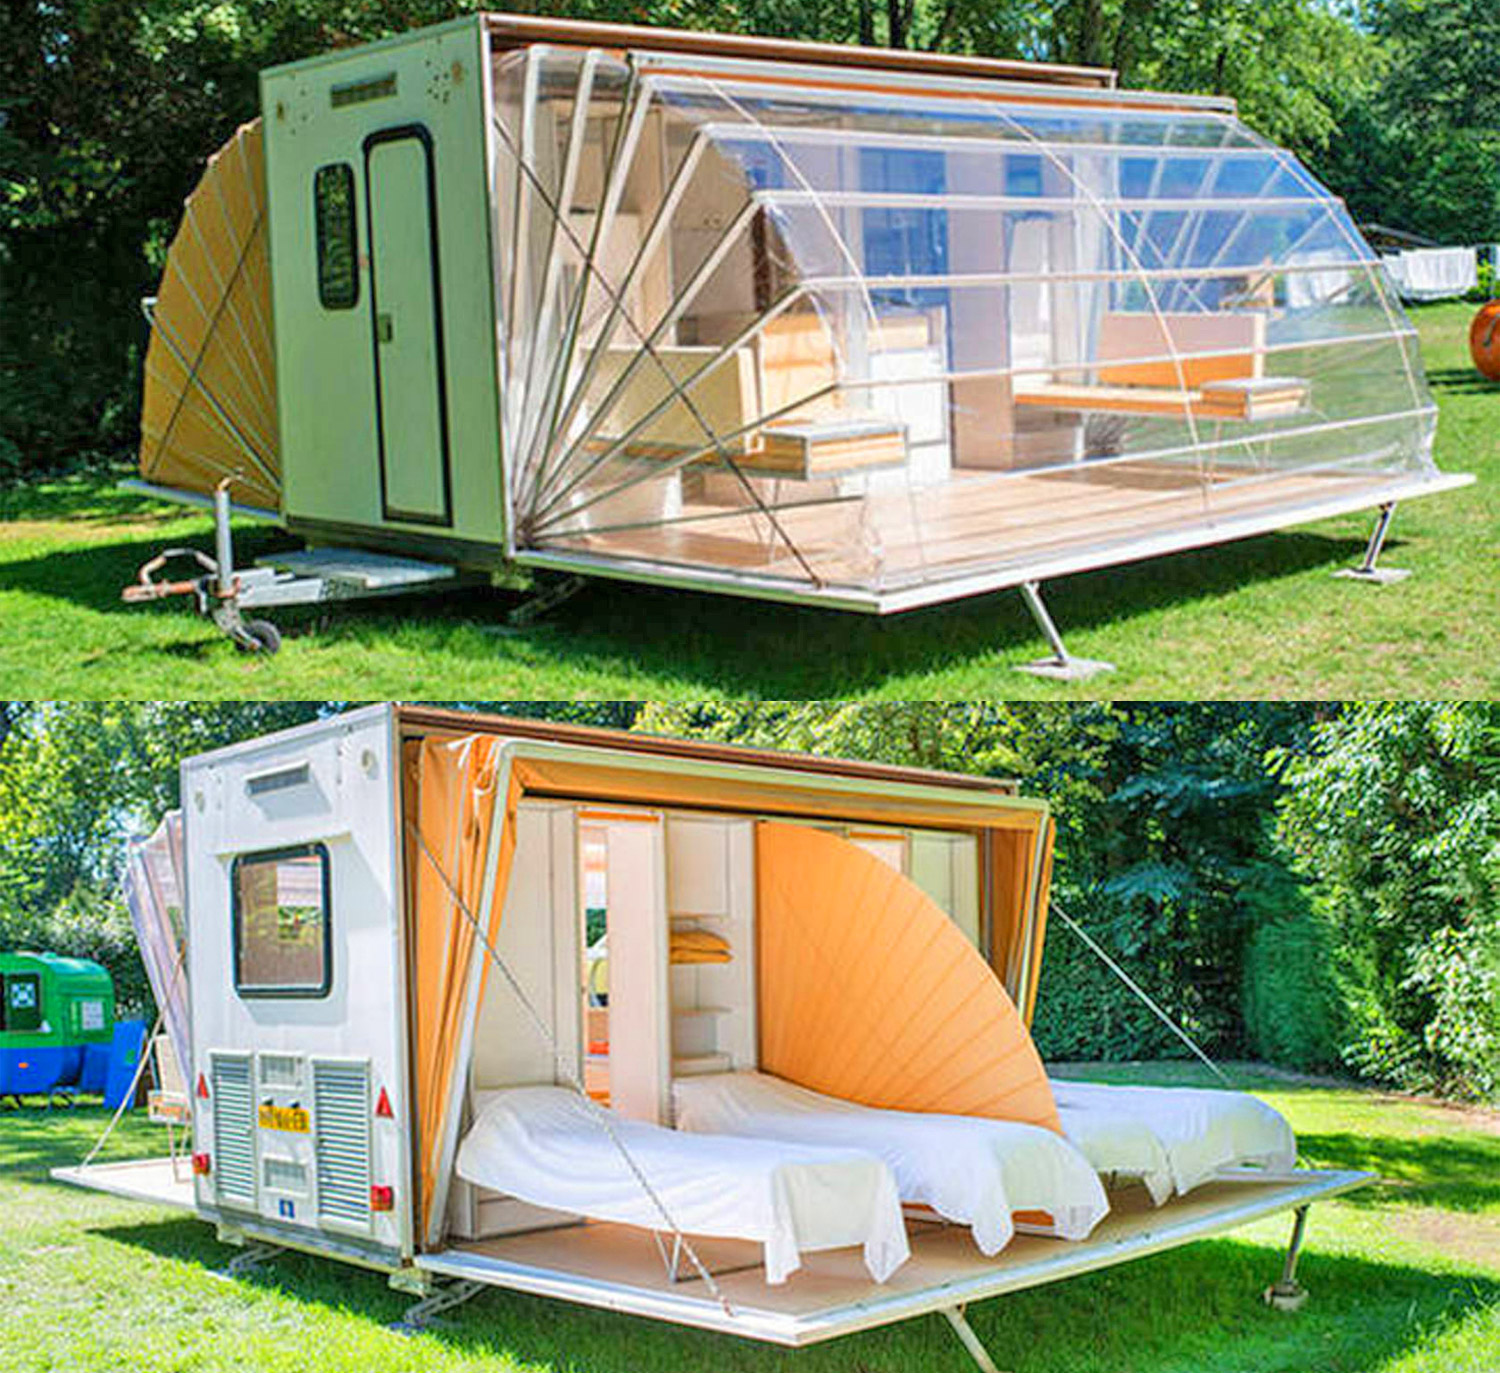 Incredible Folding Camping Trailer Expands To Triple Its Size With Fold